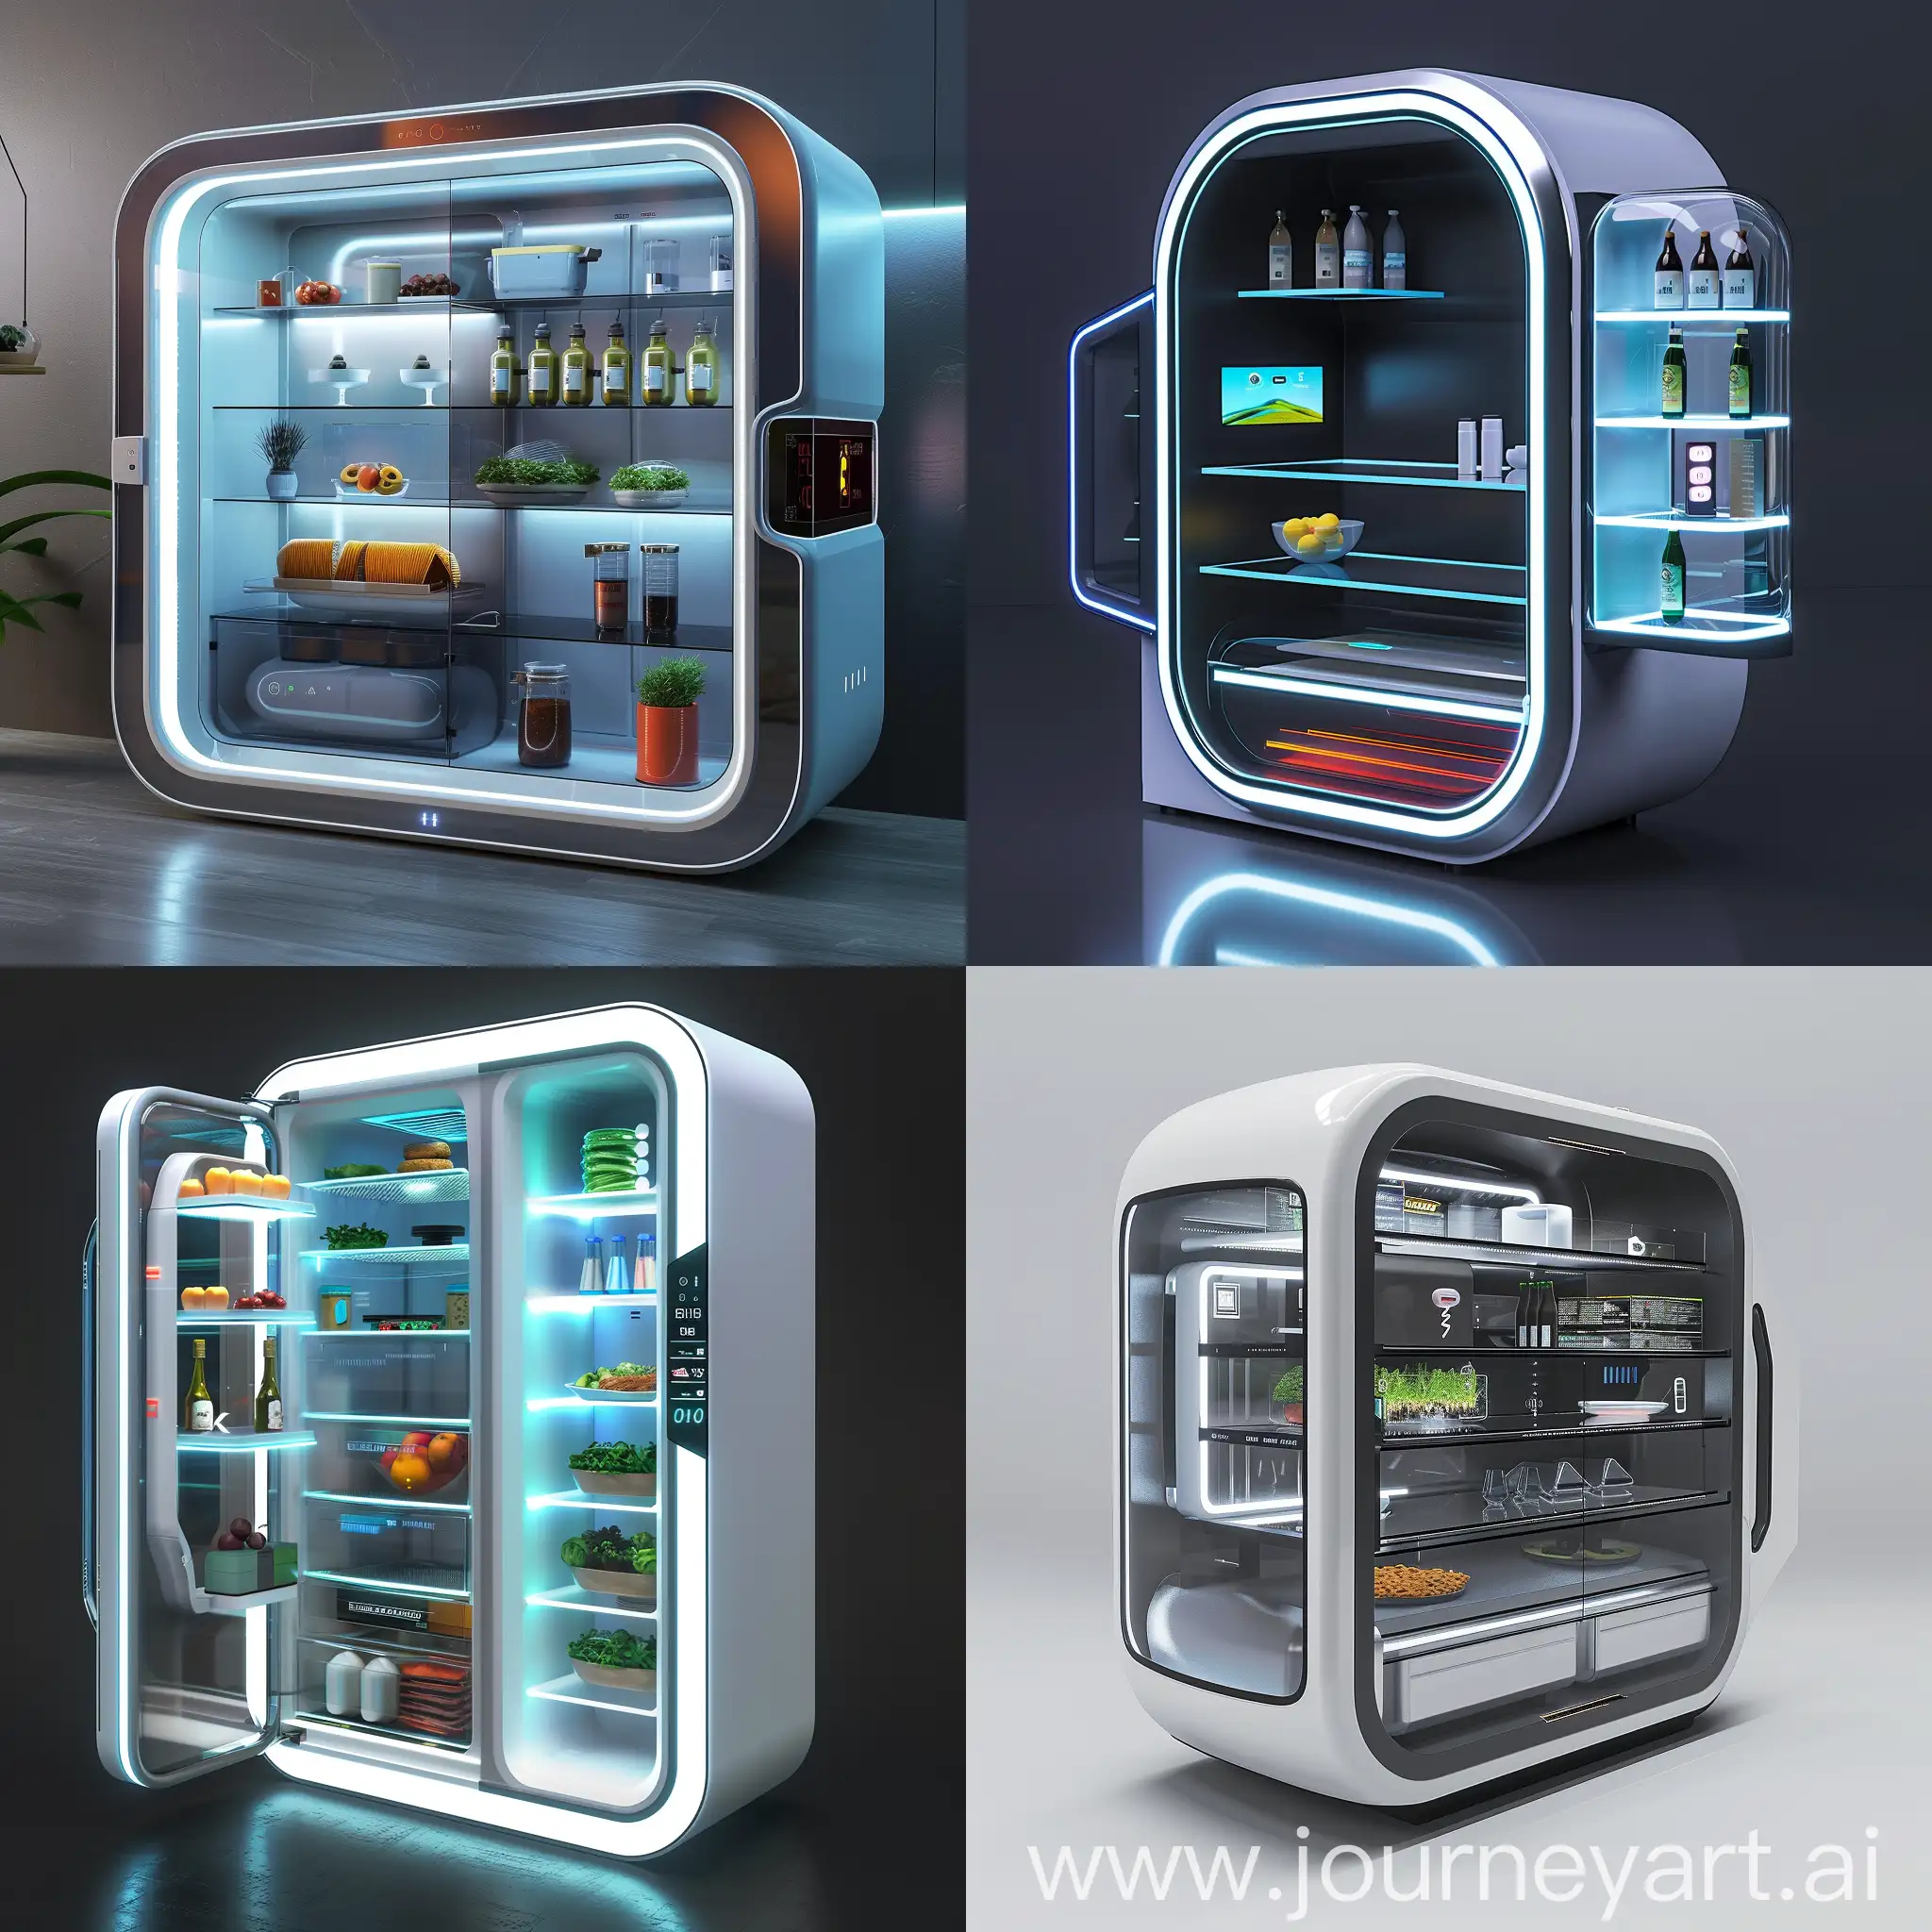 Futuristic fridge, in futuristic style, Smart Shelves with Weight Sensors, Adjustable Temperature Zones, Transparent OLED Displays, Self-Cleaning Surfaces, Automated Inventory Management, Voice and Gesture Control, Energy-Efficient Cooling Technology, Nutritional and Health Monitoring, Automated Restocking, Built-in Water and Air Purification Systems, Interactive Touchscreen Door, Smart Glass Technology, Integrated AI Personal Assistant, Proximity Sensors and Automatic Door Opening, Wi-Fi and Bluetooth Connectivity, Customizable Exterior Panels, Built-in Cameras, Energy-Efficient LED Lighting, UV-C Sterilization Technology, Wireless Charging Stations, Carbon Fiber Shelving, Polycarbonate Liners, Aluminum Alloy Cooling Coils, Plastic Interior Components, Foam Composite Insulation, Titanium Hinges and Hardware, Magnesium Alloy Door Frames, Polymer Door Seals, Composite Compressor Housing, Hollow-Core Shelving, Aluminum Alloy Exterior Panels, Polycarbonate Door Handles, Thin Profile LED Display, Slimline Glass Doors, Integrated Plastic Trim, Carbon Fiber Reinforced Plastic Kick Plate, Fiberglass Reinforced Plastic Back Panel, Retractable Handles, Hollow-Core Exterior Walls, Minimalist Design, unreal engine 5 --stylize 1000